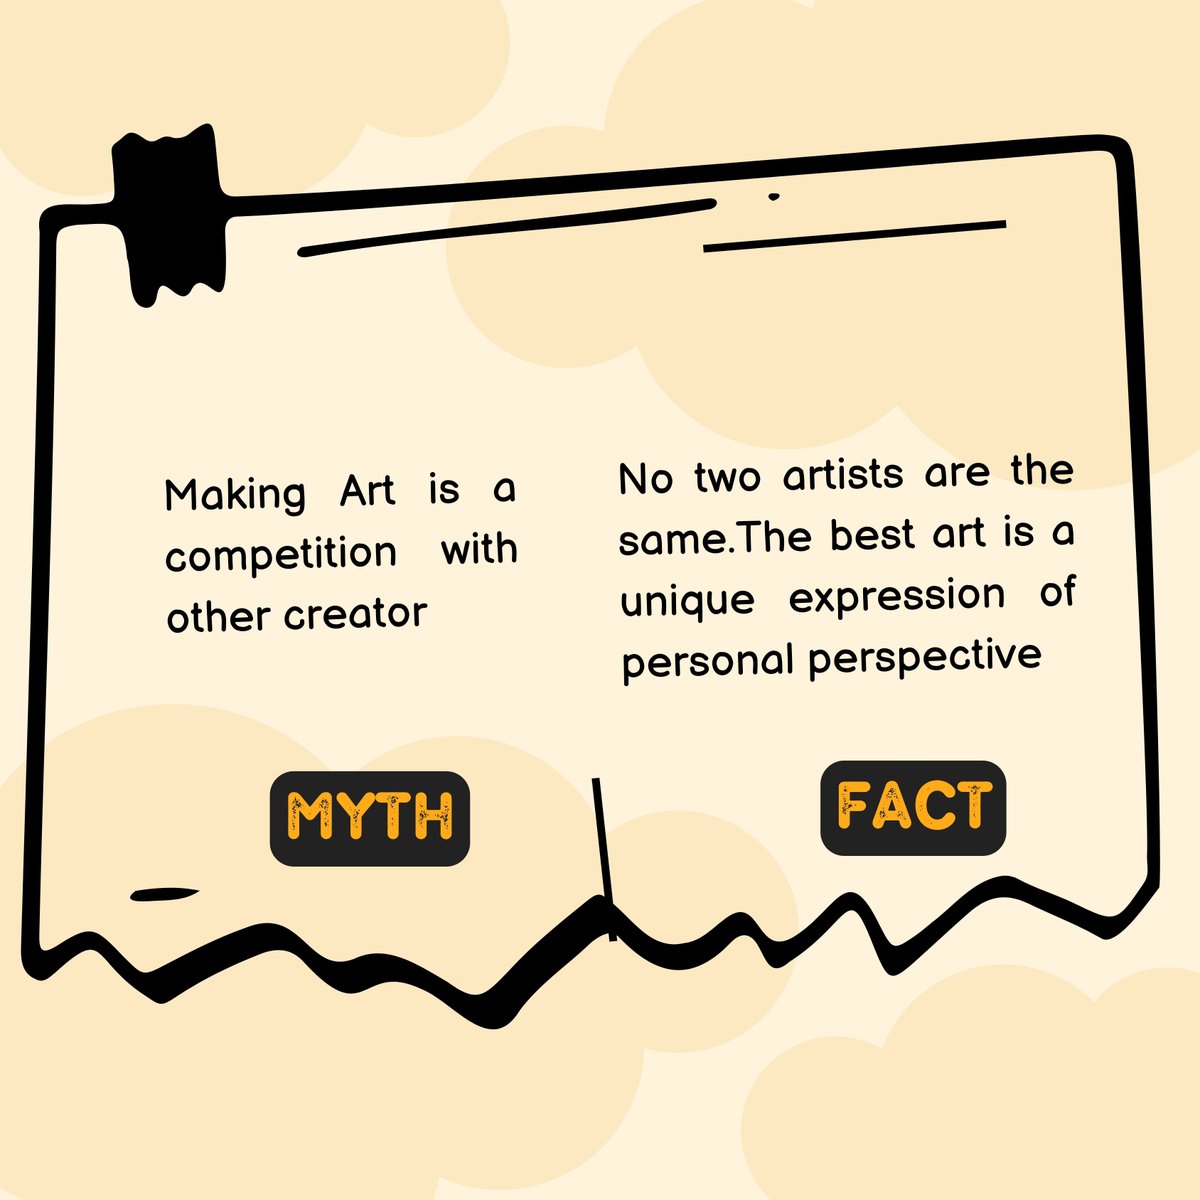 'Myth vs Fact: Unlocking the Truth Behind Creativity and Art'
.
.
.
.
.
.
#CreativityUnveiled #ArtisticTruths #MythBusters #CreativeFacts #ArtisticMyths #UnravelingCreativity #DiscoveringArt #FactVsFiction #CreativeJourney #ArtisticRevelations #gallery4percent_official